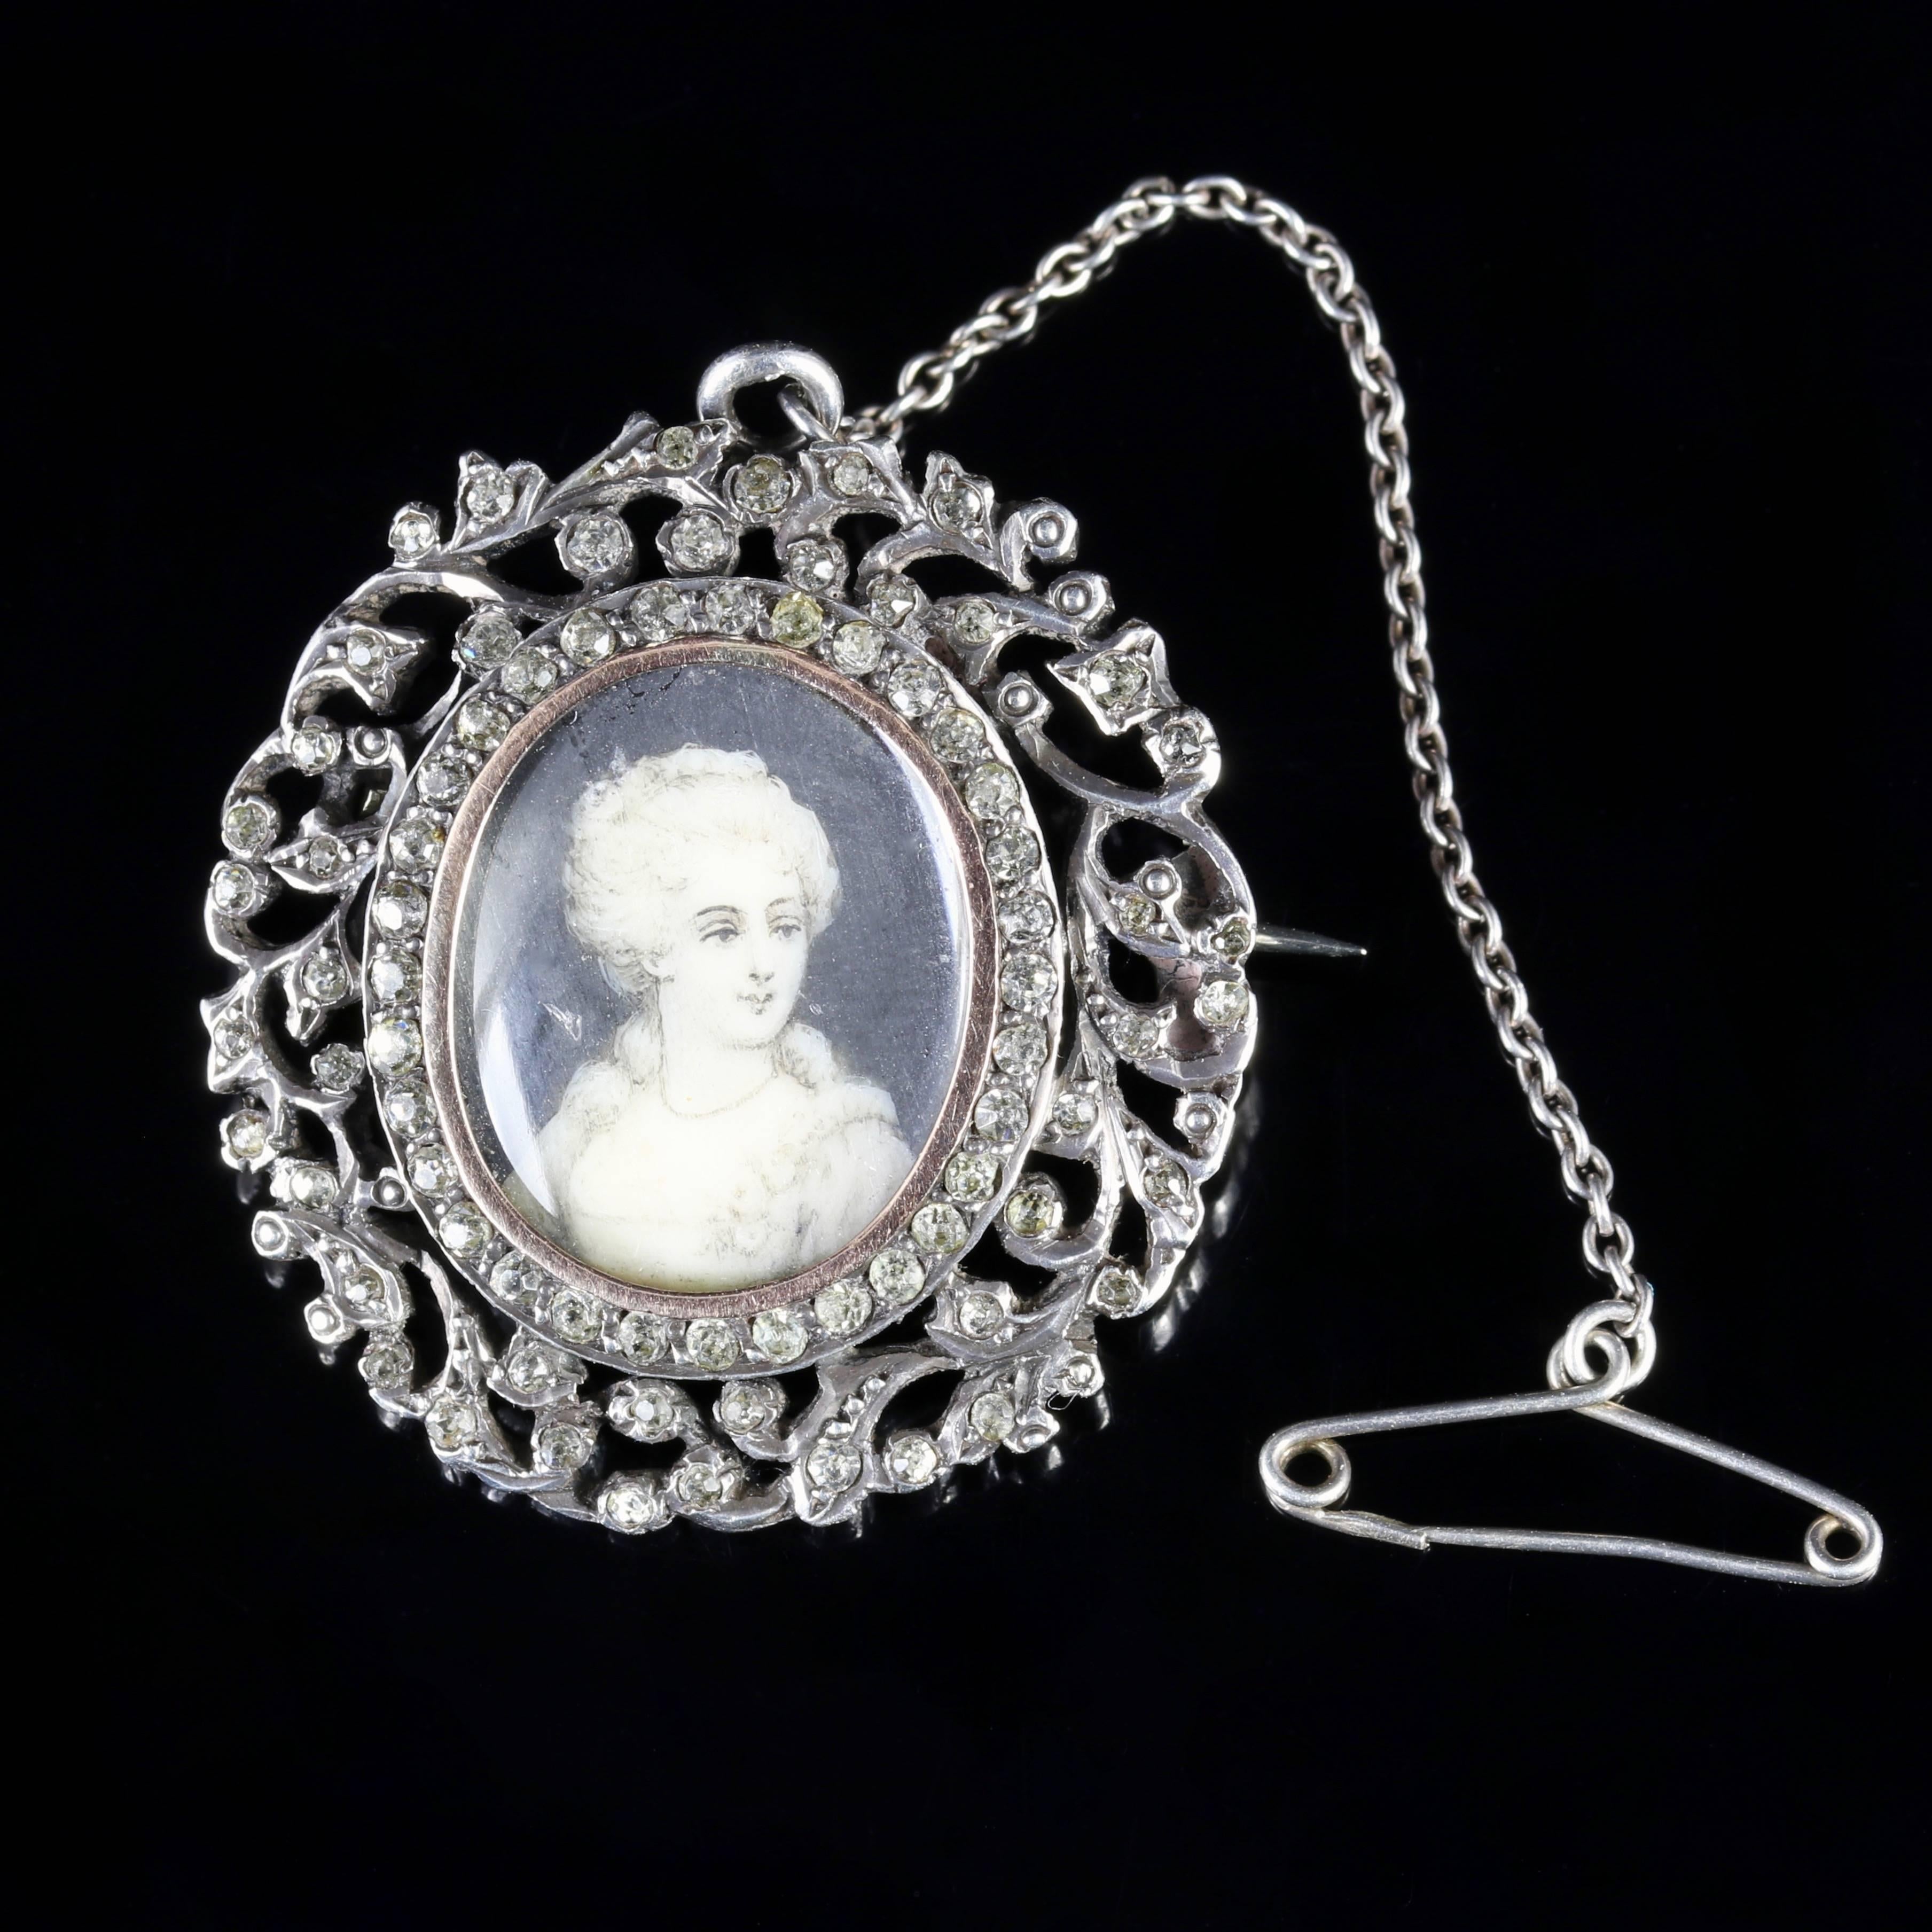 This genuine Antique Georgian Sterling Silver brooch is complete with original box. 

A genuine Georgian piece, Circa 1800.

A hand painted portrait sits in the centre of the brooch showing an elegant lady surrounded by a Gold gallery.

A halo of